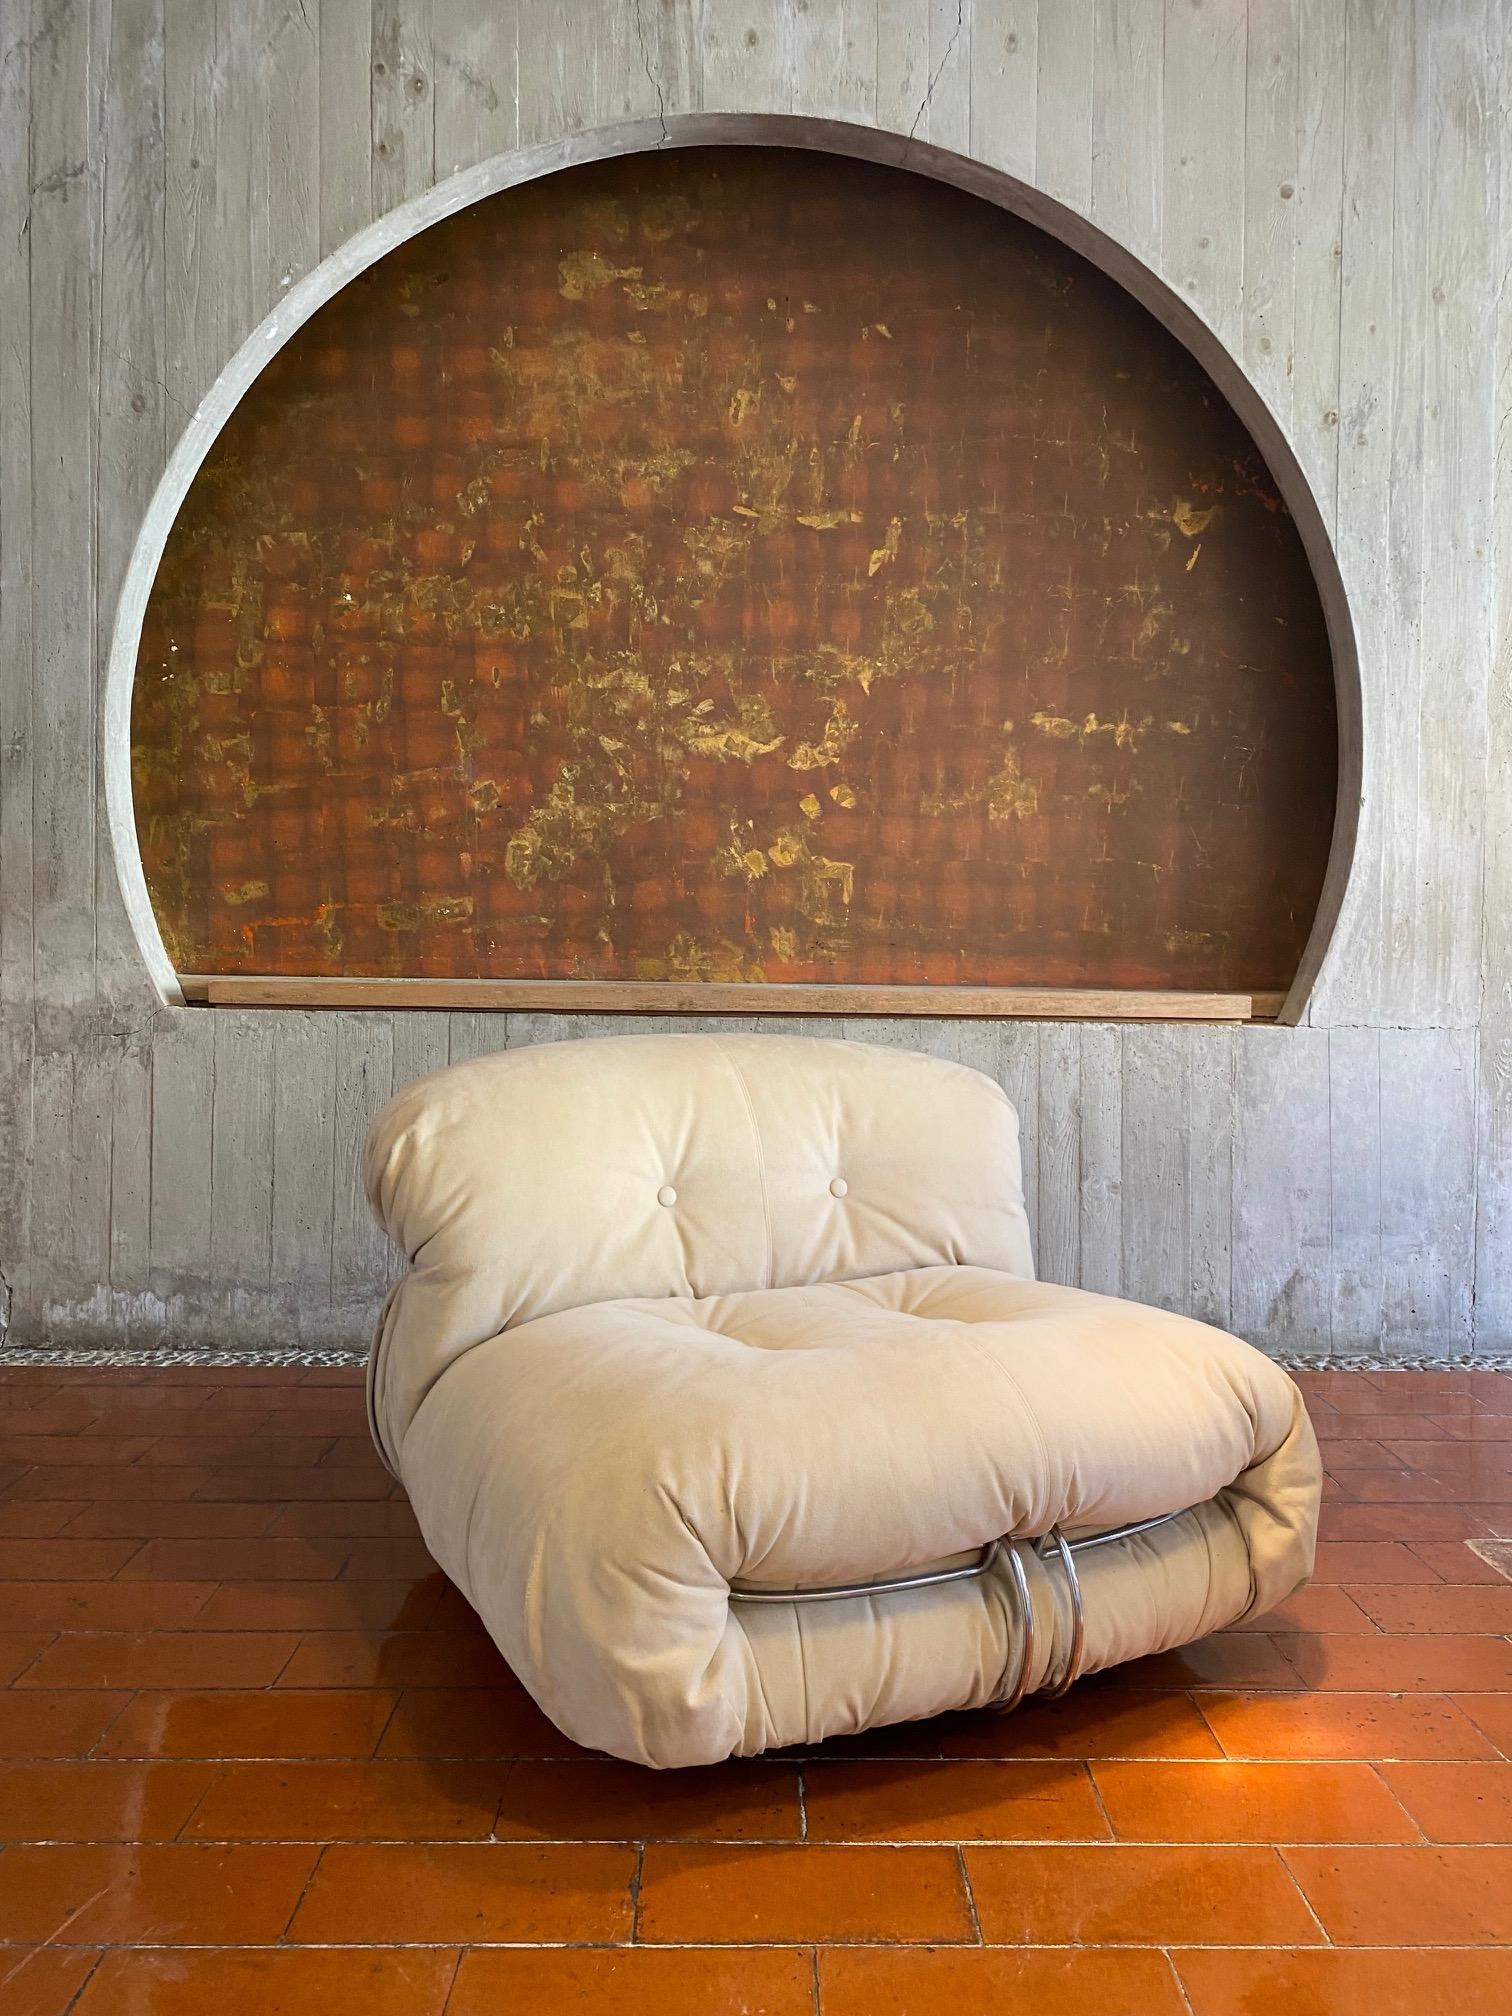 Afra & Tobia Scarpa, Soriana Armchair, Cassina, Italy, 1970s.

Afra (1937-2011) & Tobia (1935-) Scarpa both studied at the Venice Institute of Architecture. Their pieces are exhibited in many museums worldwide, collections the MoMa in New York and